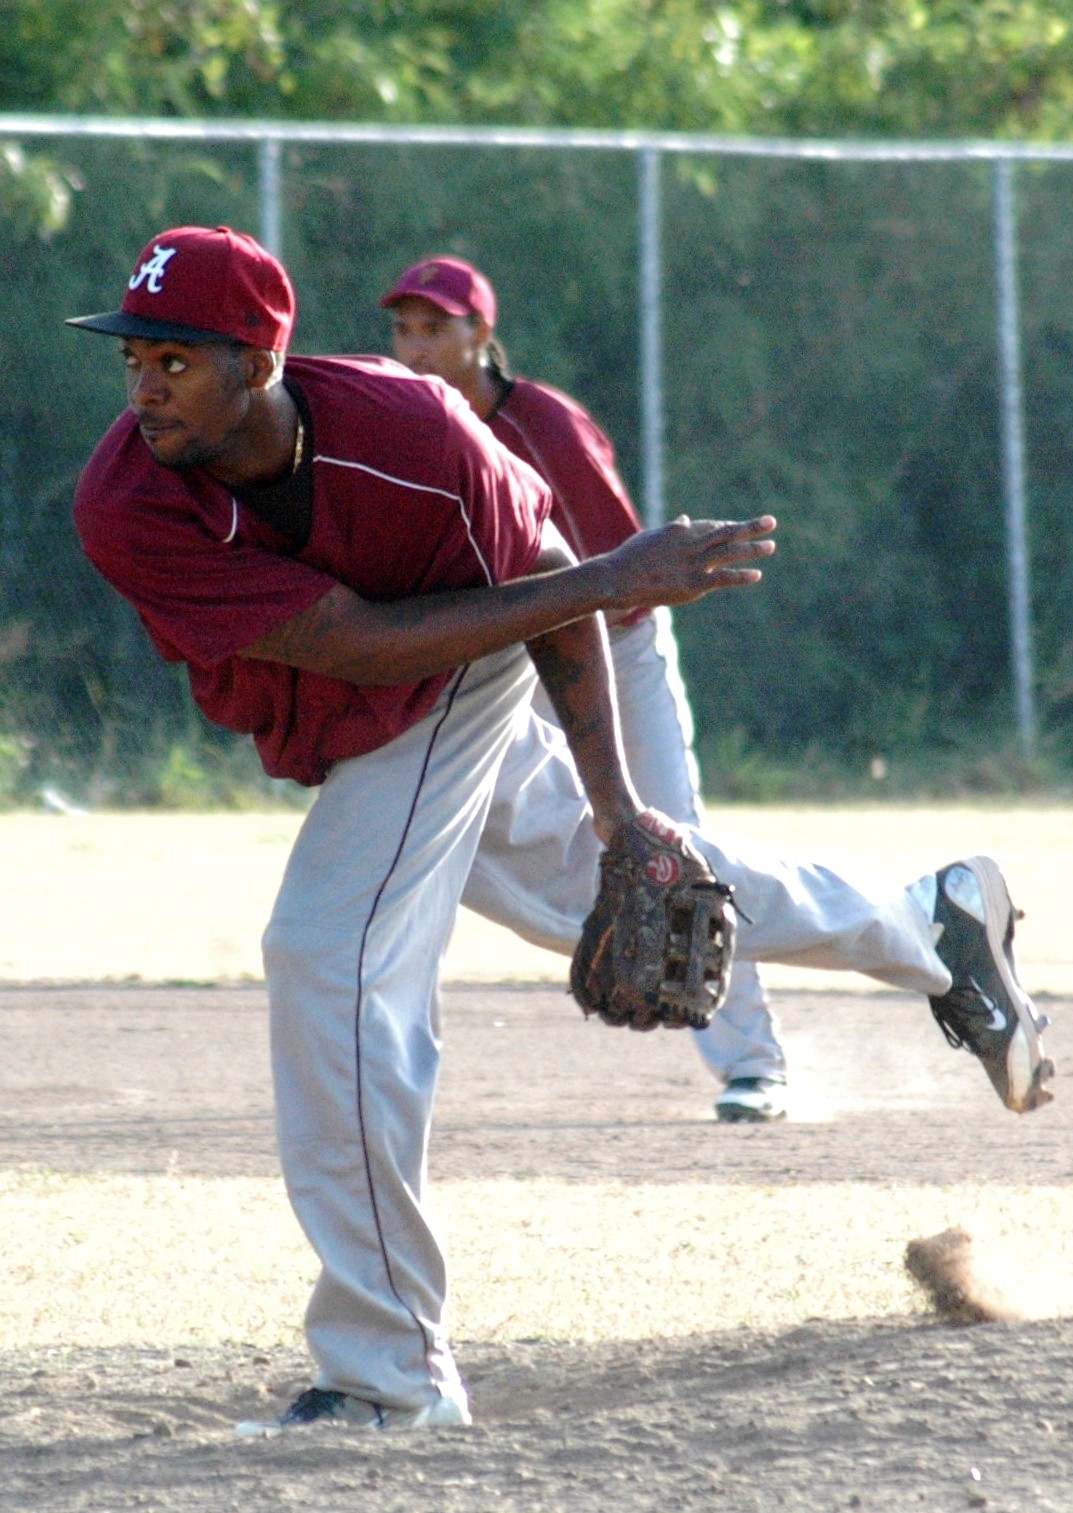 The Vikings' Colin Williams pitched three scoreless innings to pick up the save in game one.